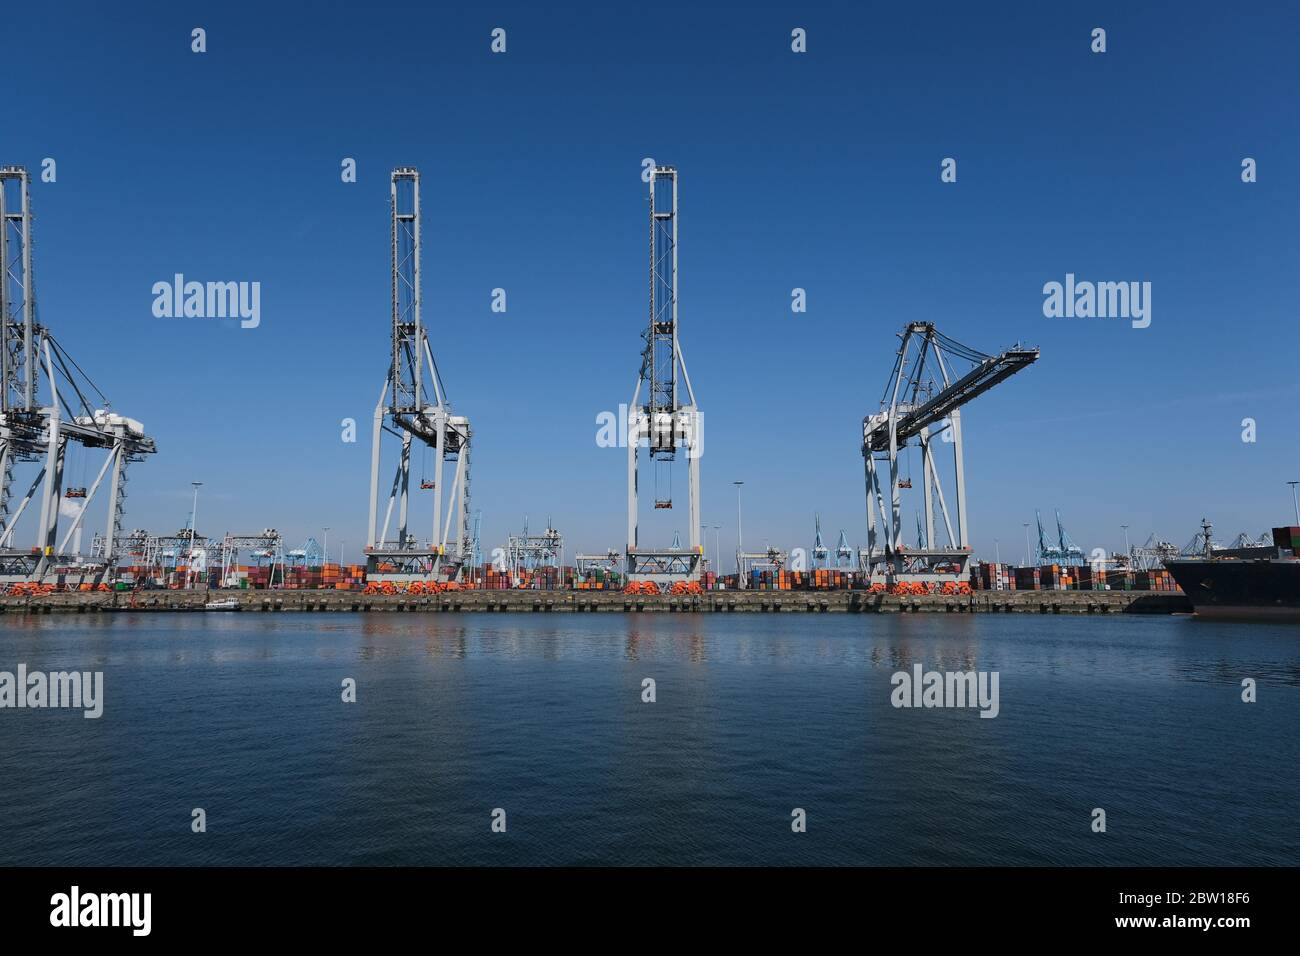 Huge cranes and ships anchored at harbor. International commercial port, city of Rotterdam background. Logistics business Stock Photo